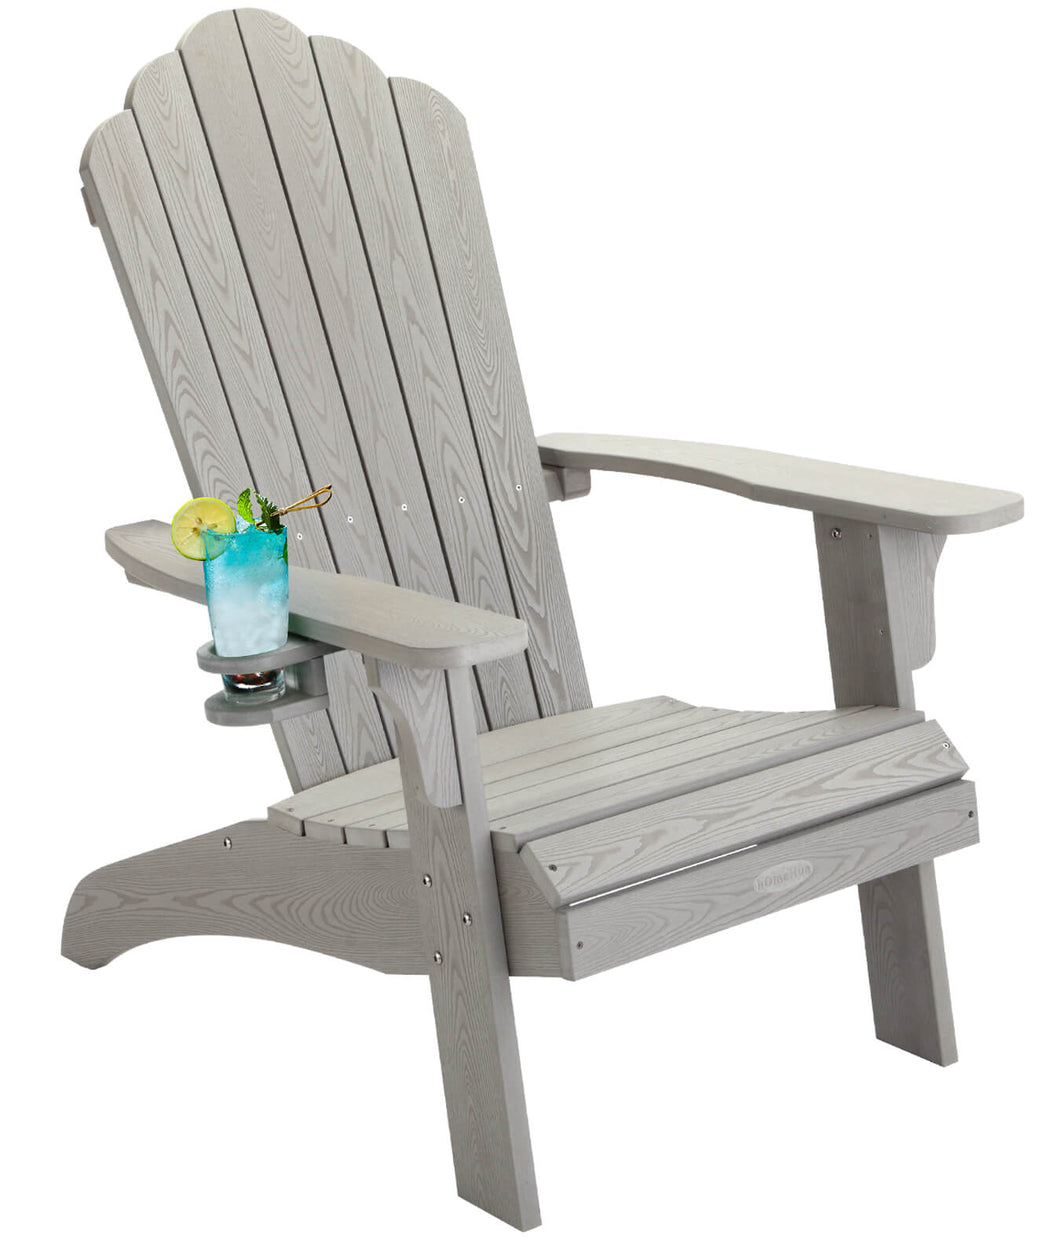 Oversized Adirondack Chair Weather Resistant with Cup Holder - Gray